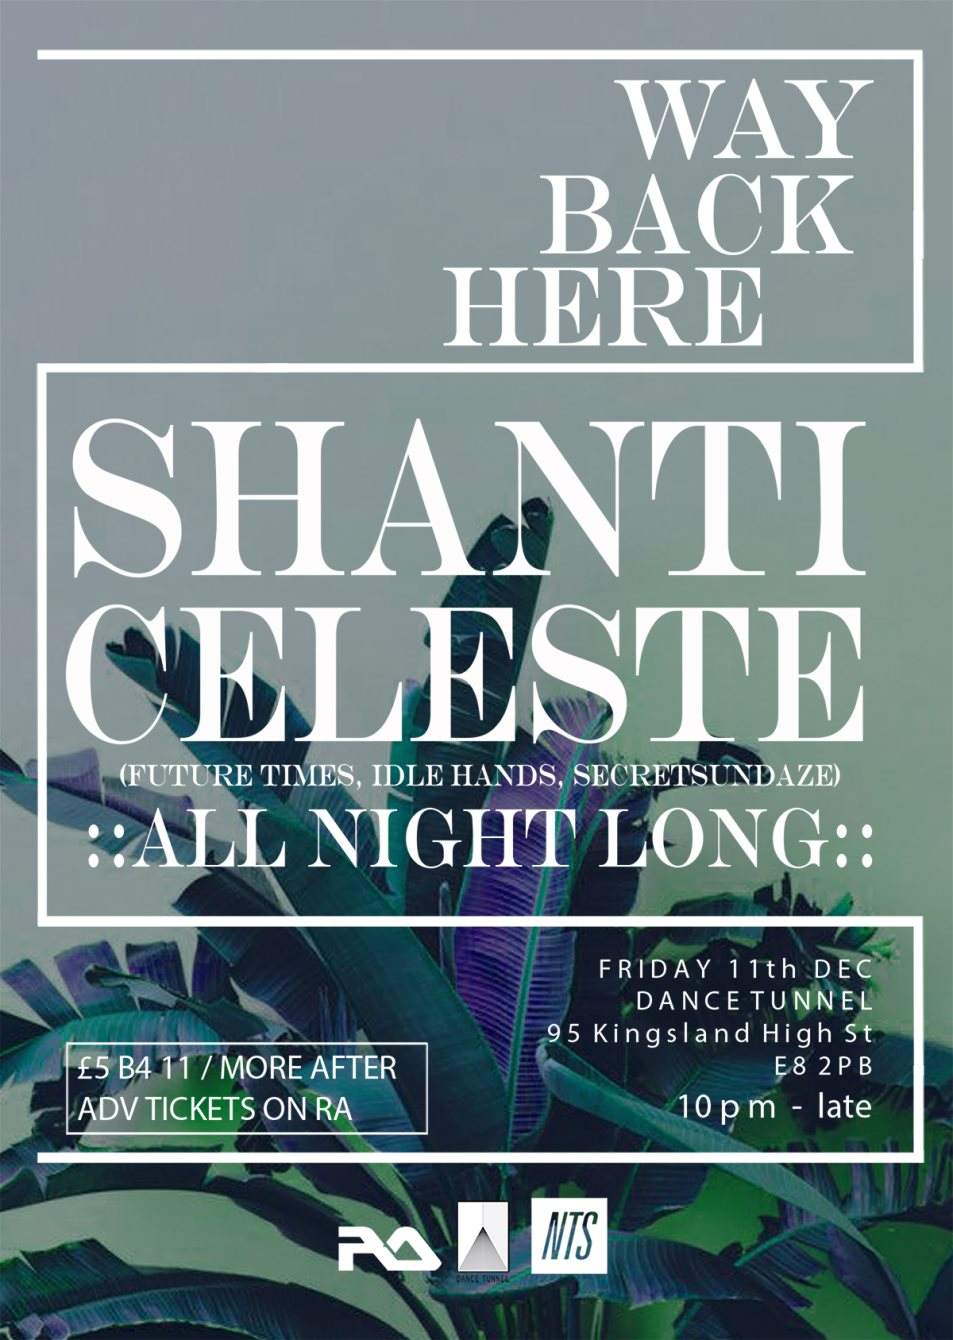 Way Back Here with Shanti Celeste (All Night Long) - フライヤー表